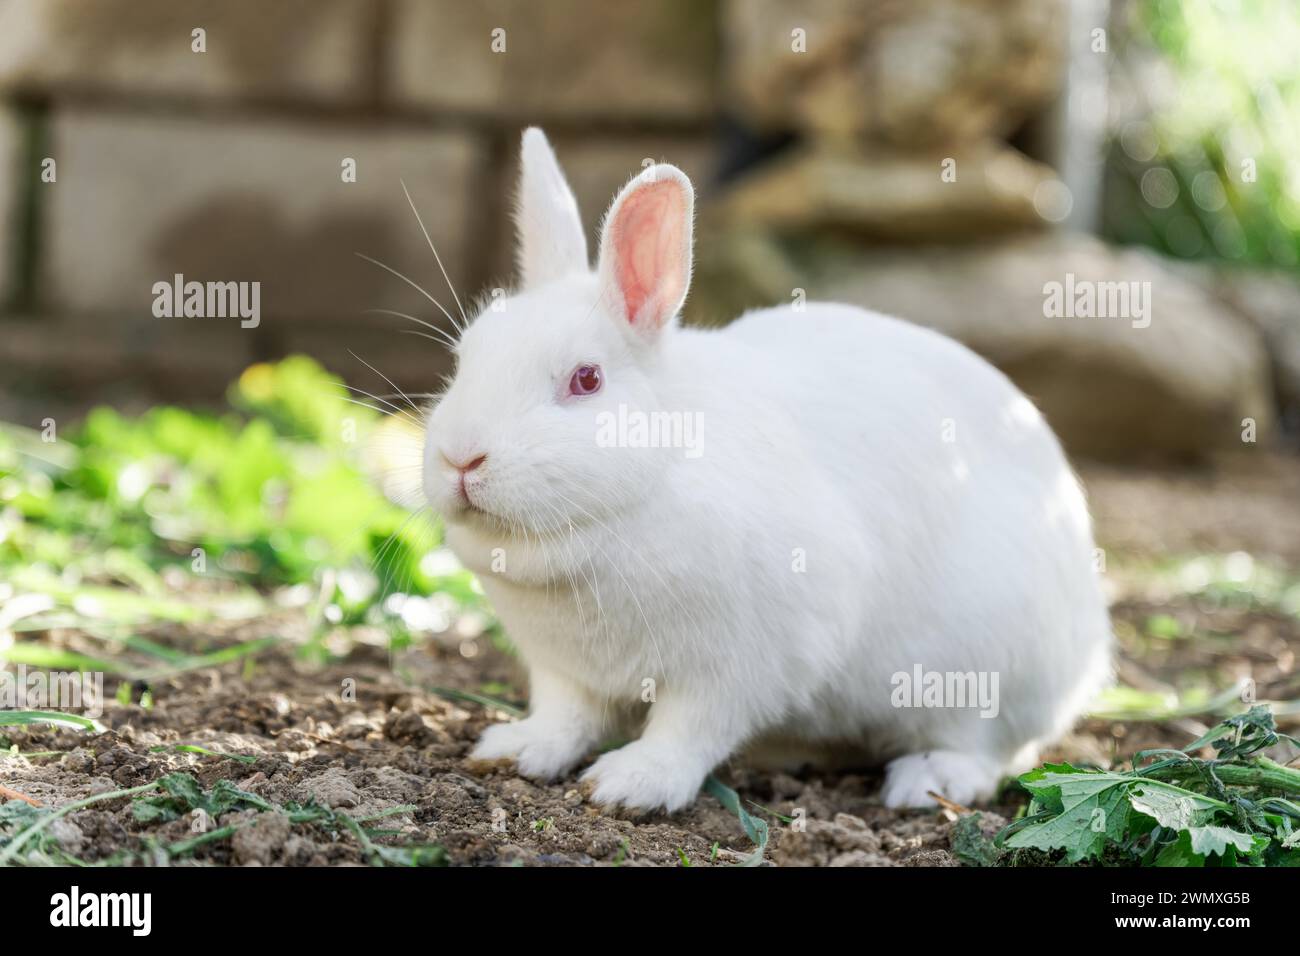 Close-up of a white rabbit on a farm eating vegetables Stock Photo